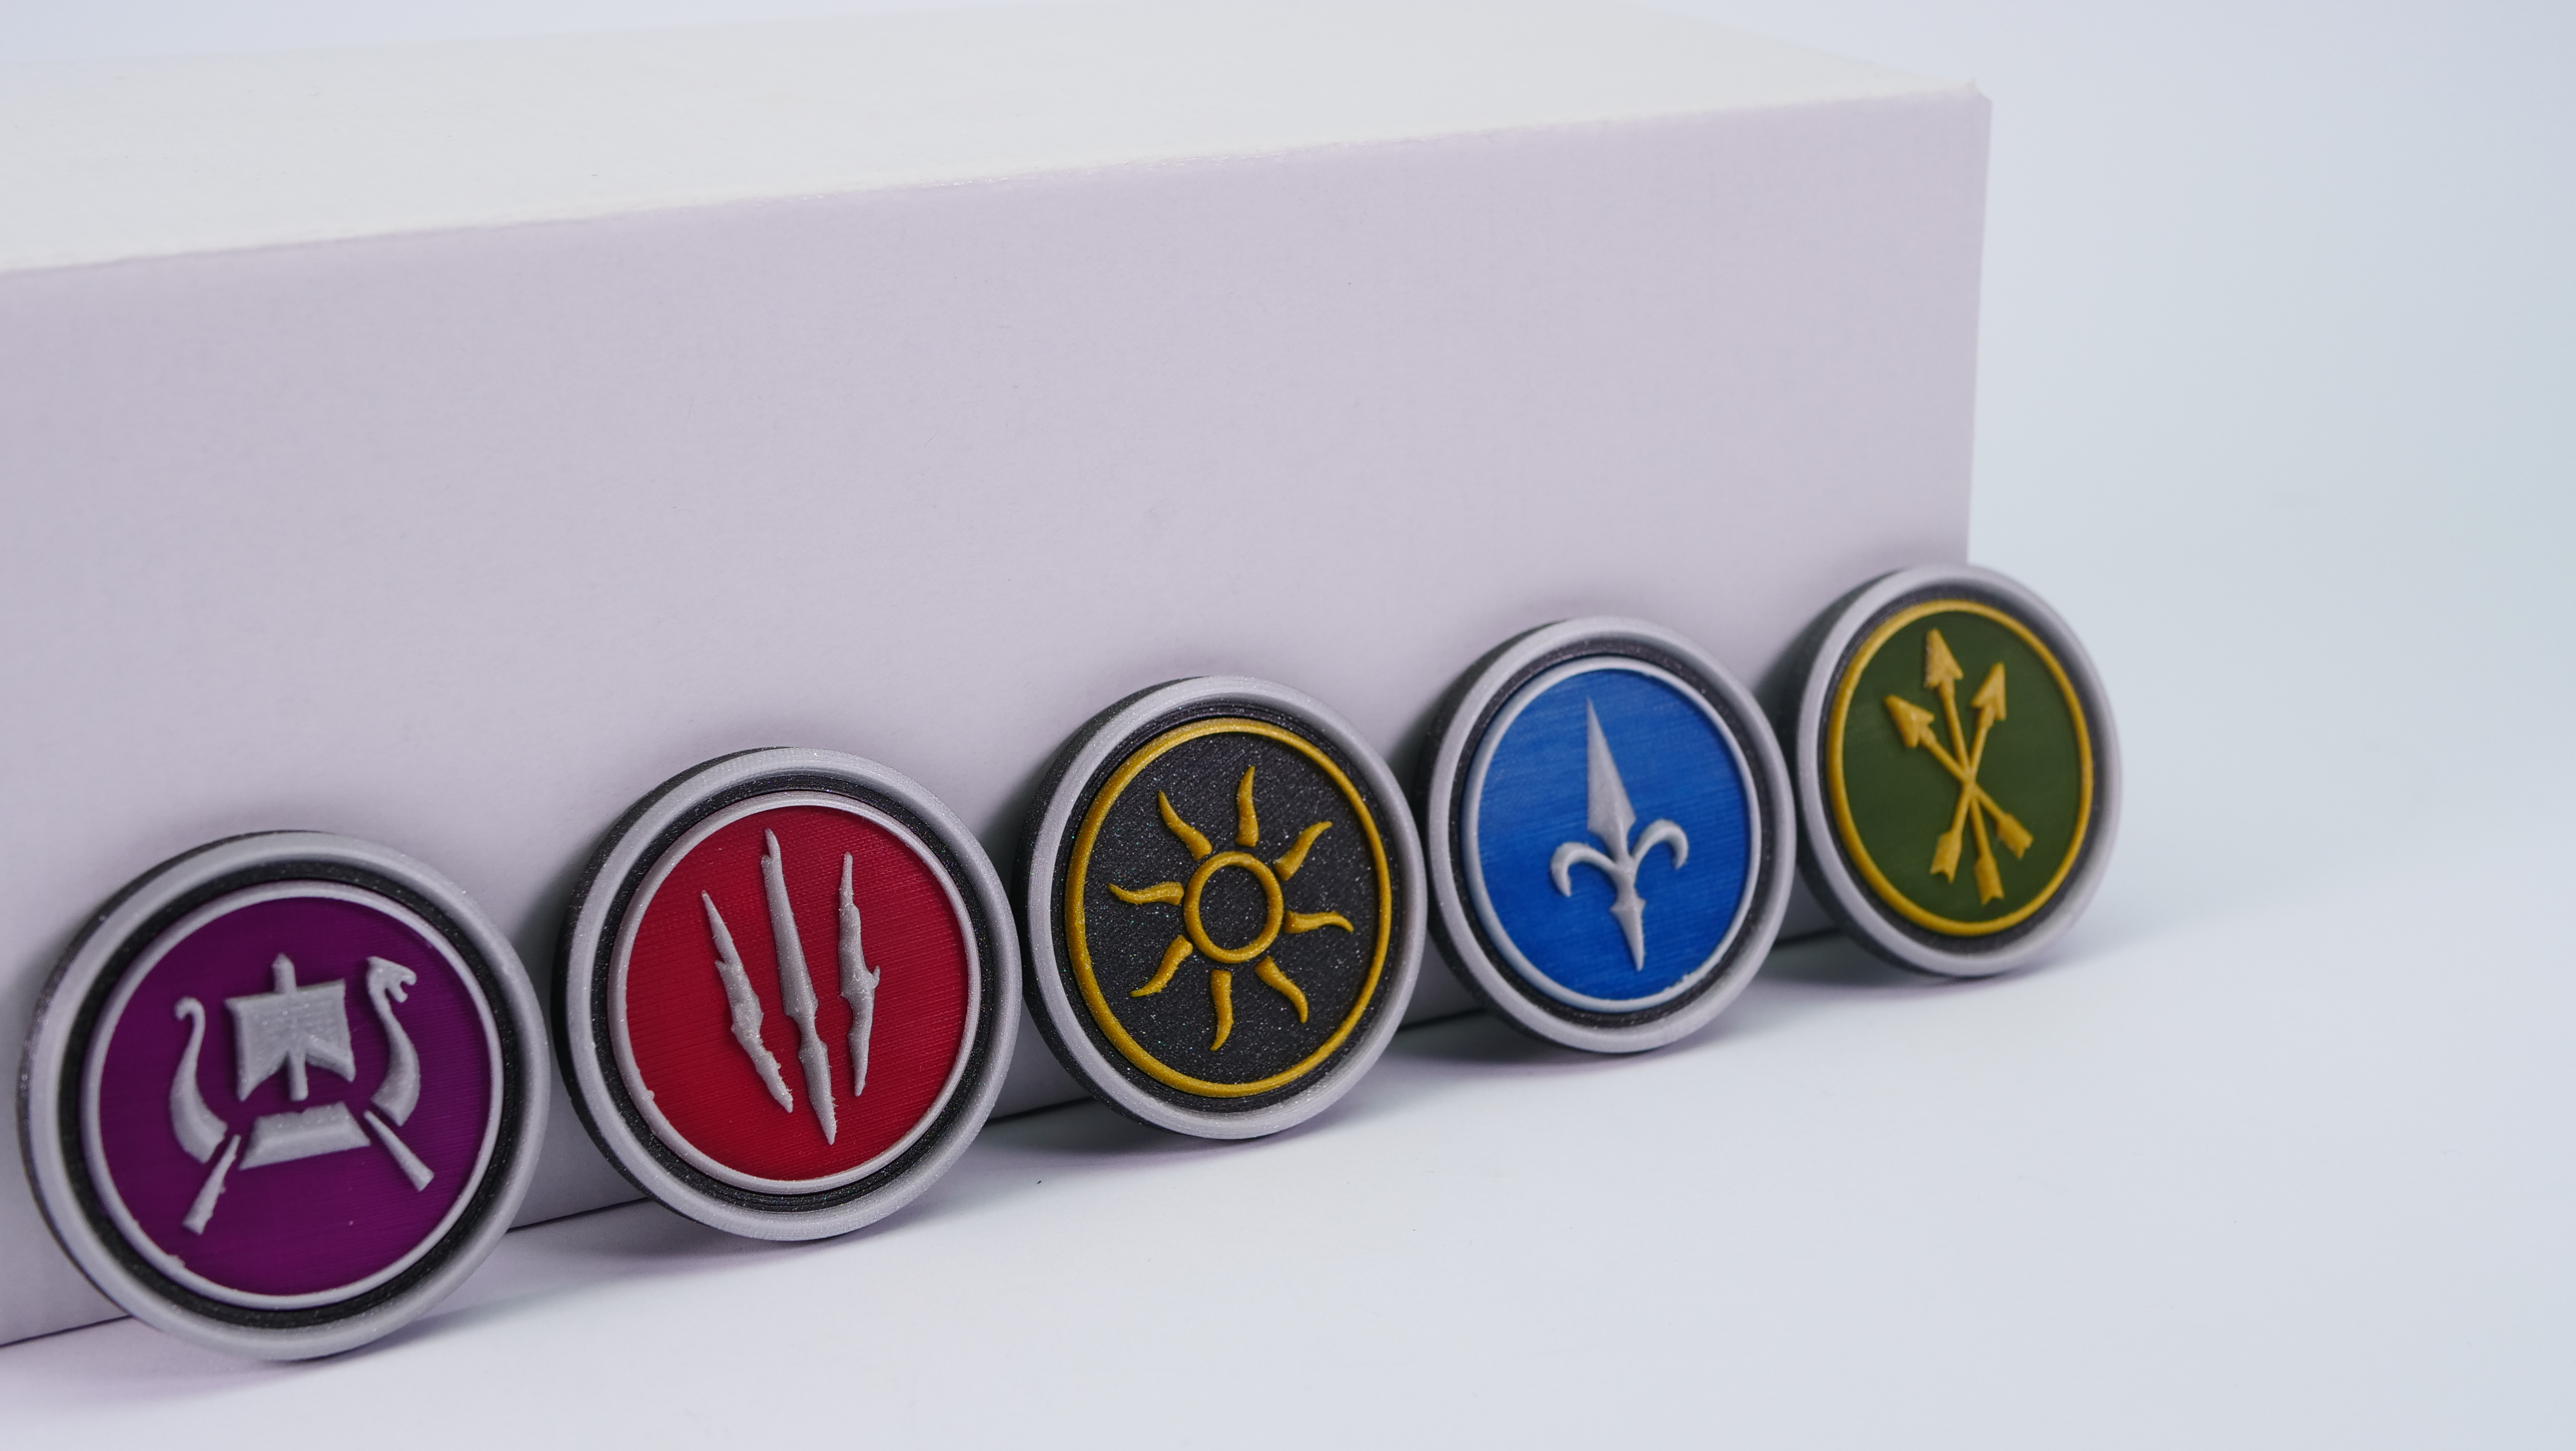 Witcher Gwent Faction Coins Magnets